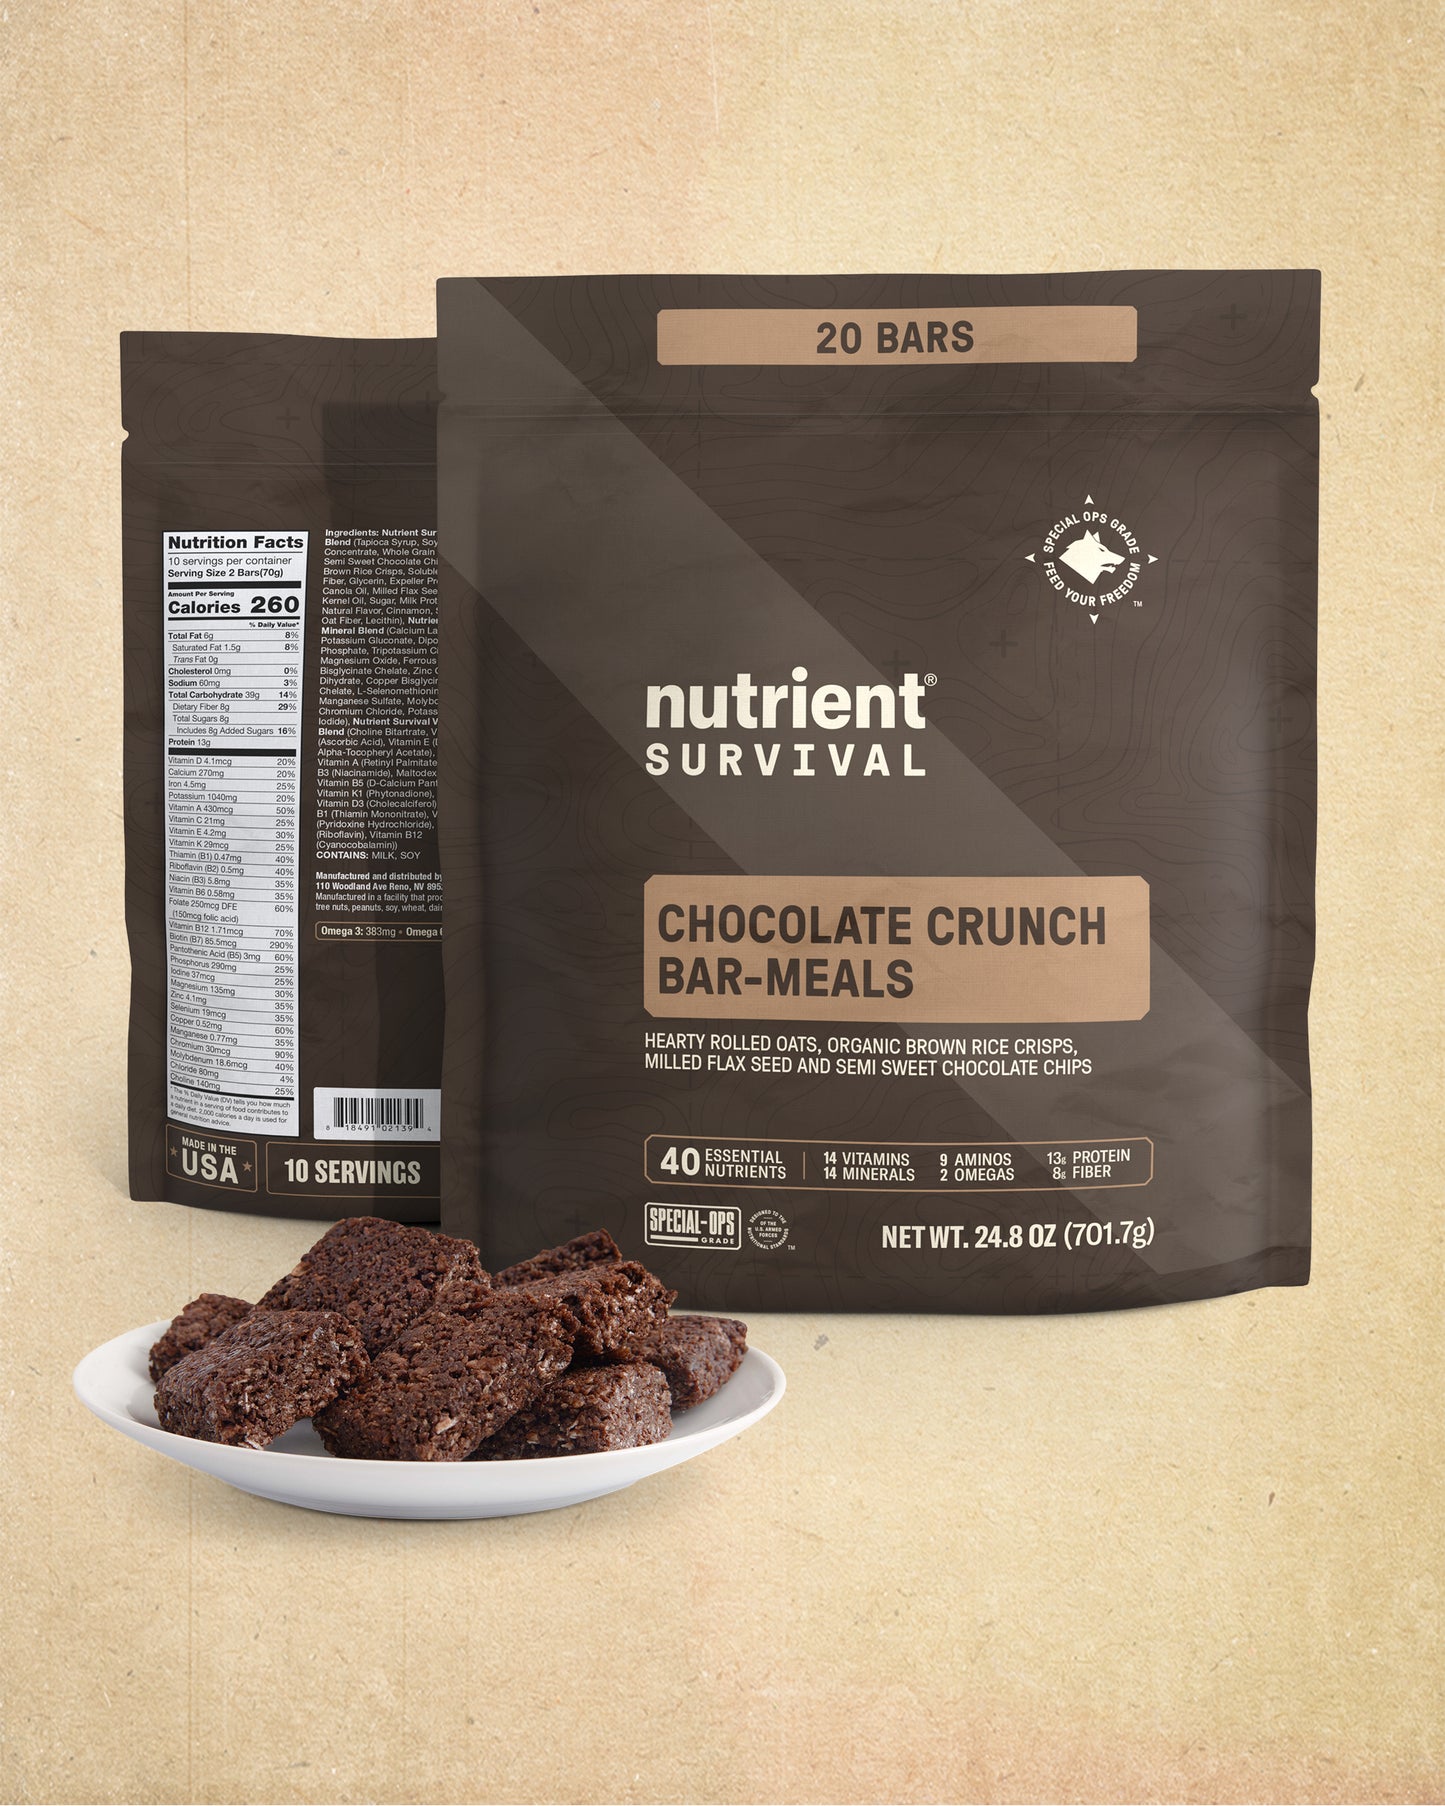 Chocolate Crunch Bar-Meals Pantry Pack